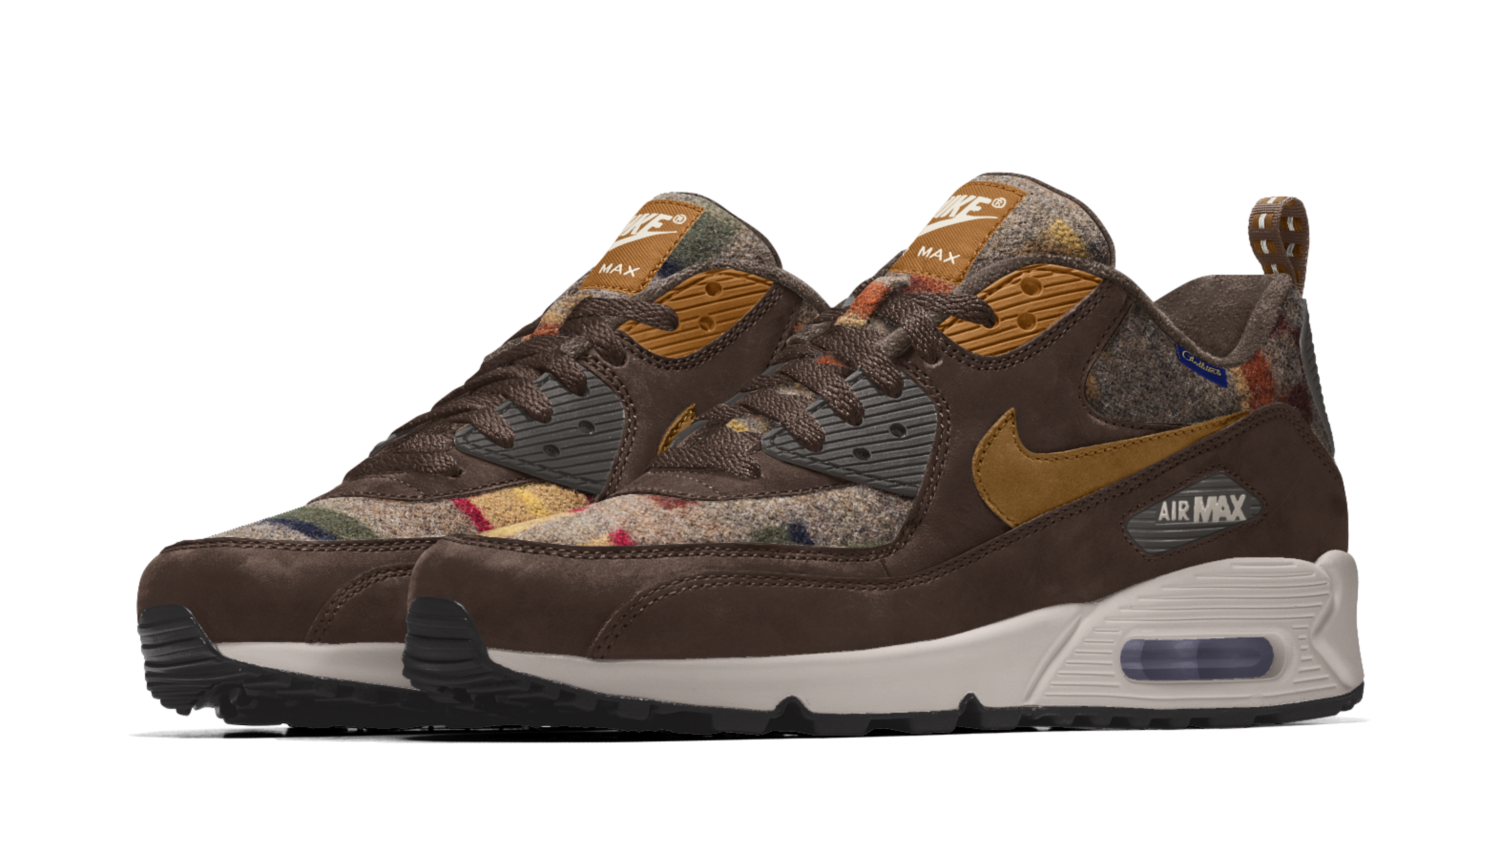 Max 90 iD Pendleton Available Now | Sole Collector